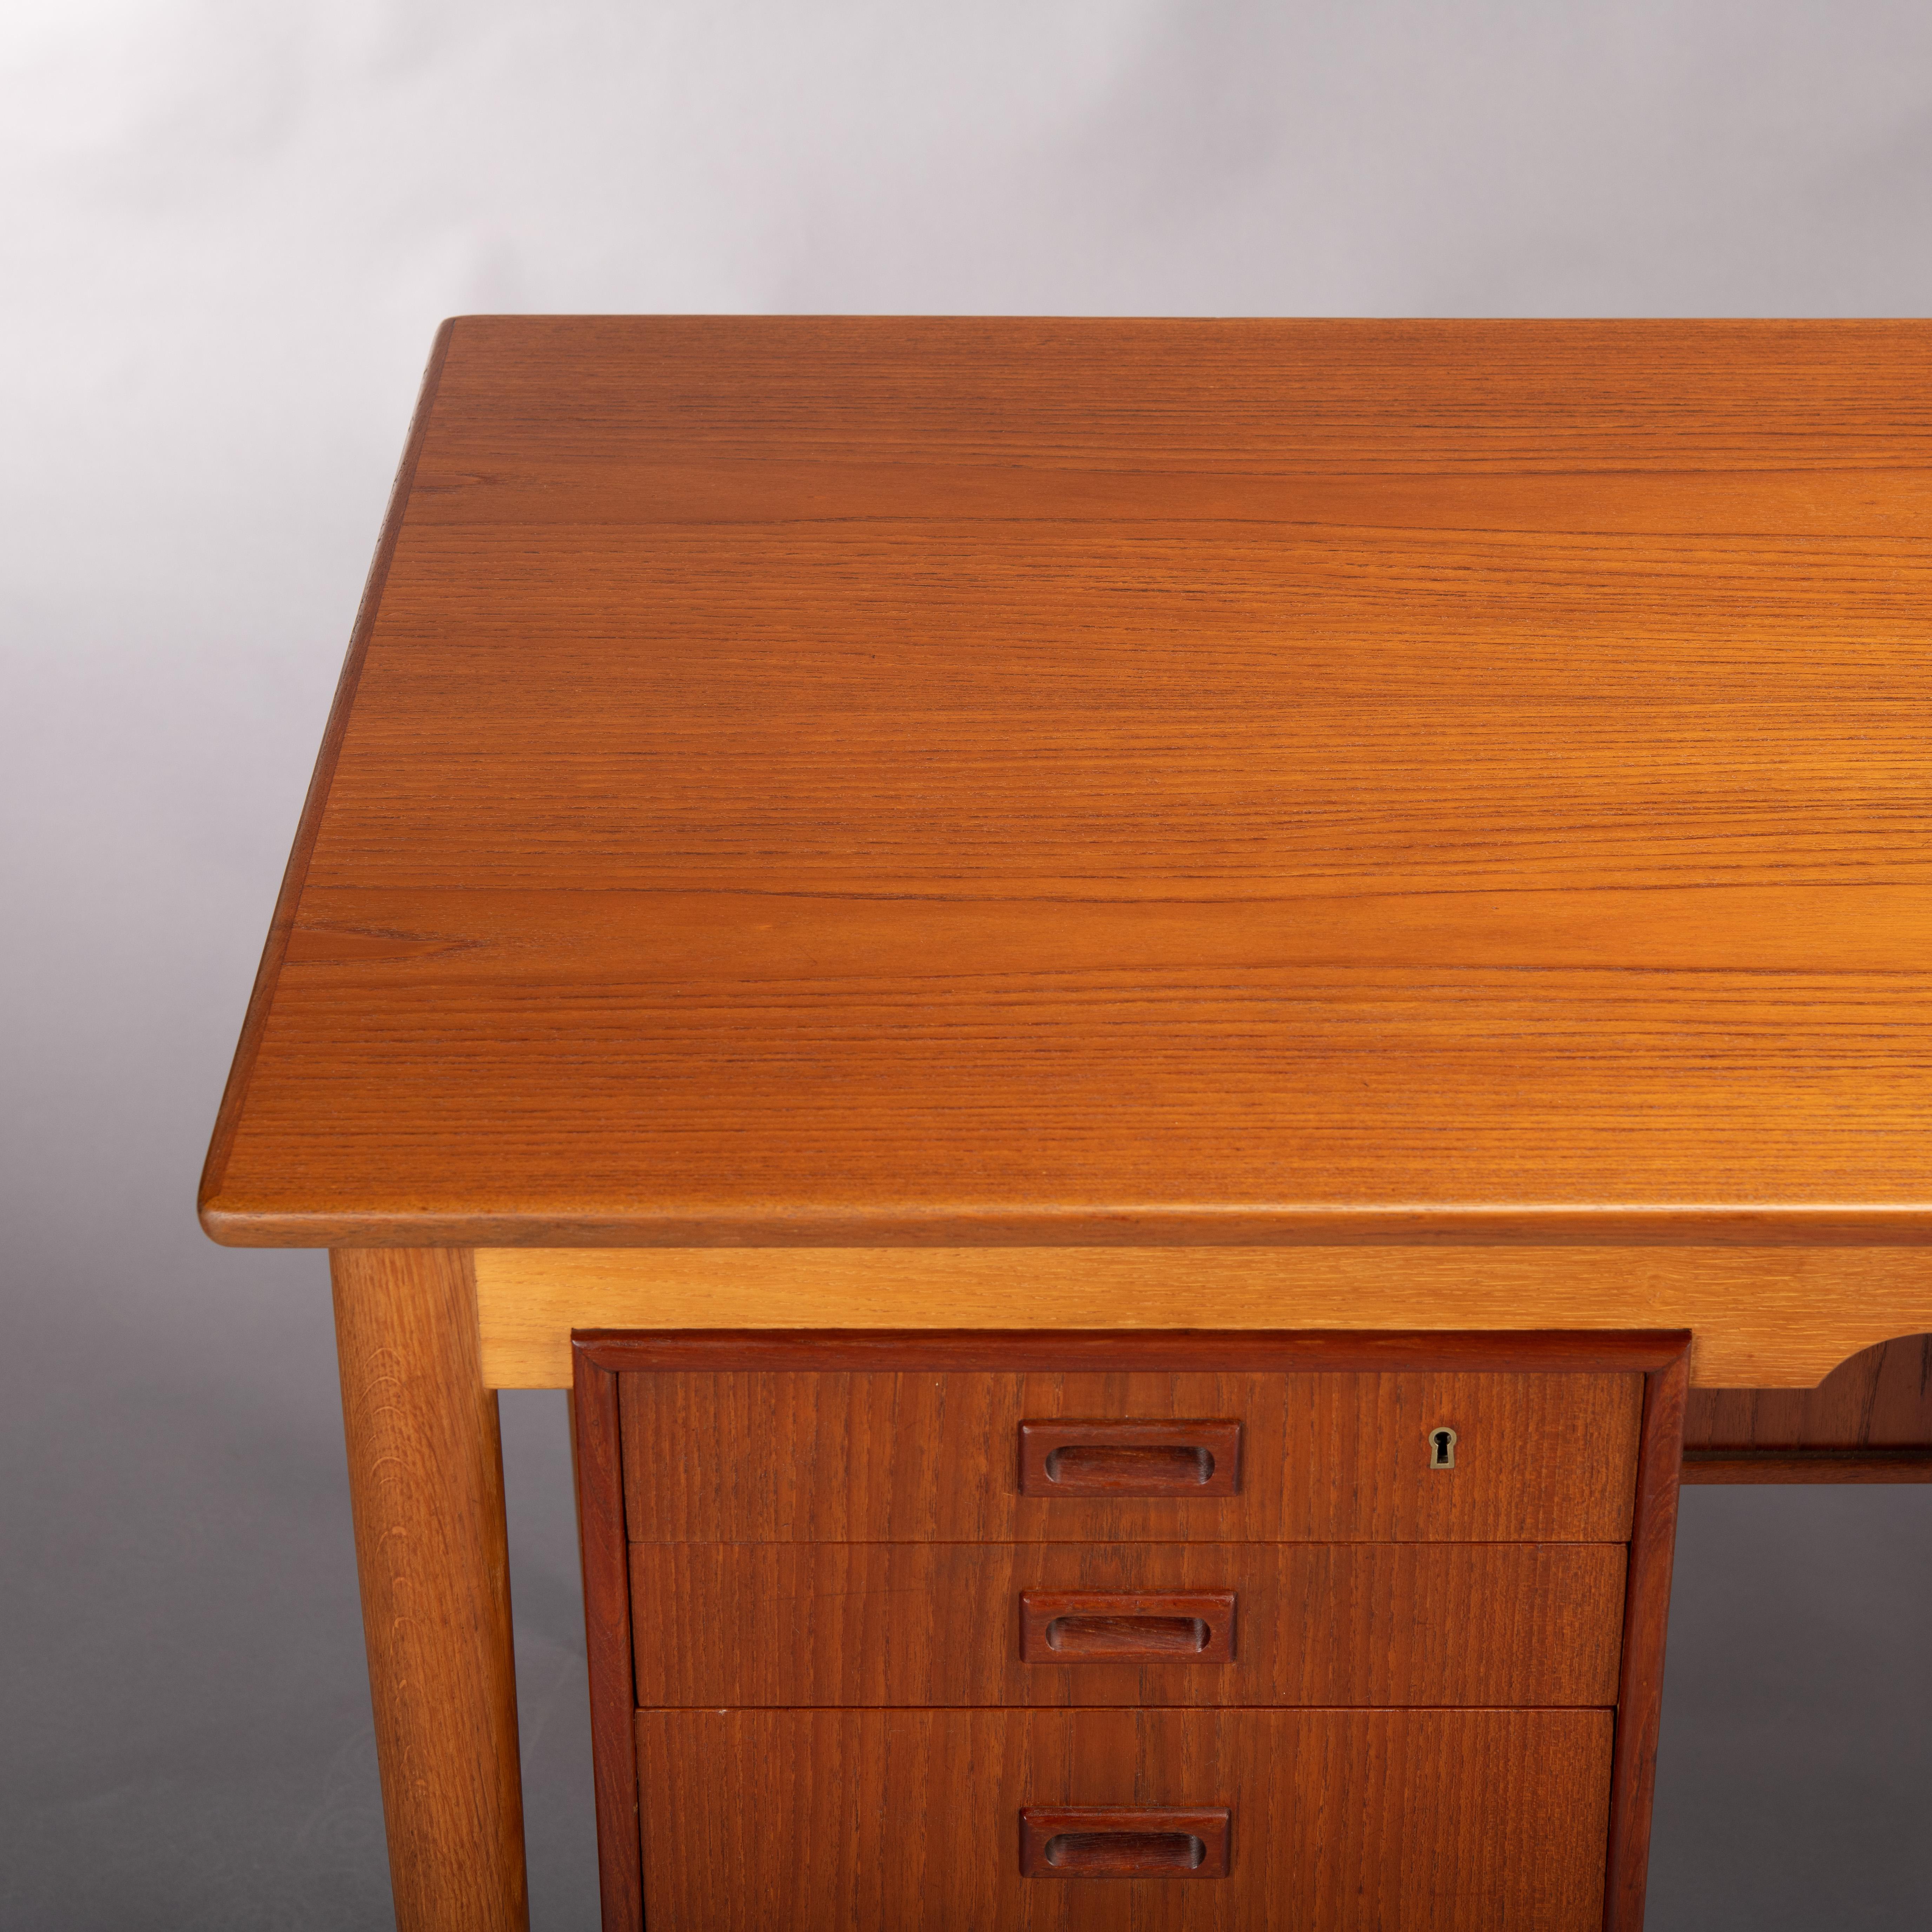 Danish desk
This mid-century desk had a paralleled path of construction. It comprises a teak veneered leaf with oak base and a sub section that was later fitted underneath. The combination actually looks really good. We found this out when